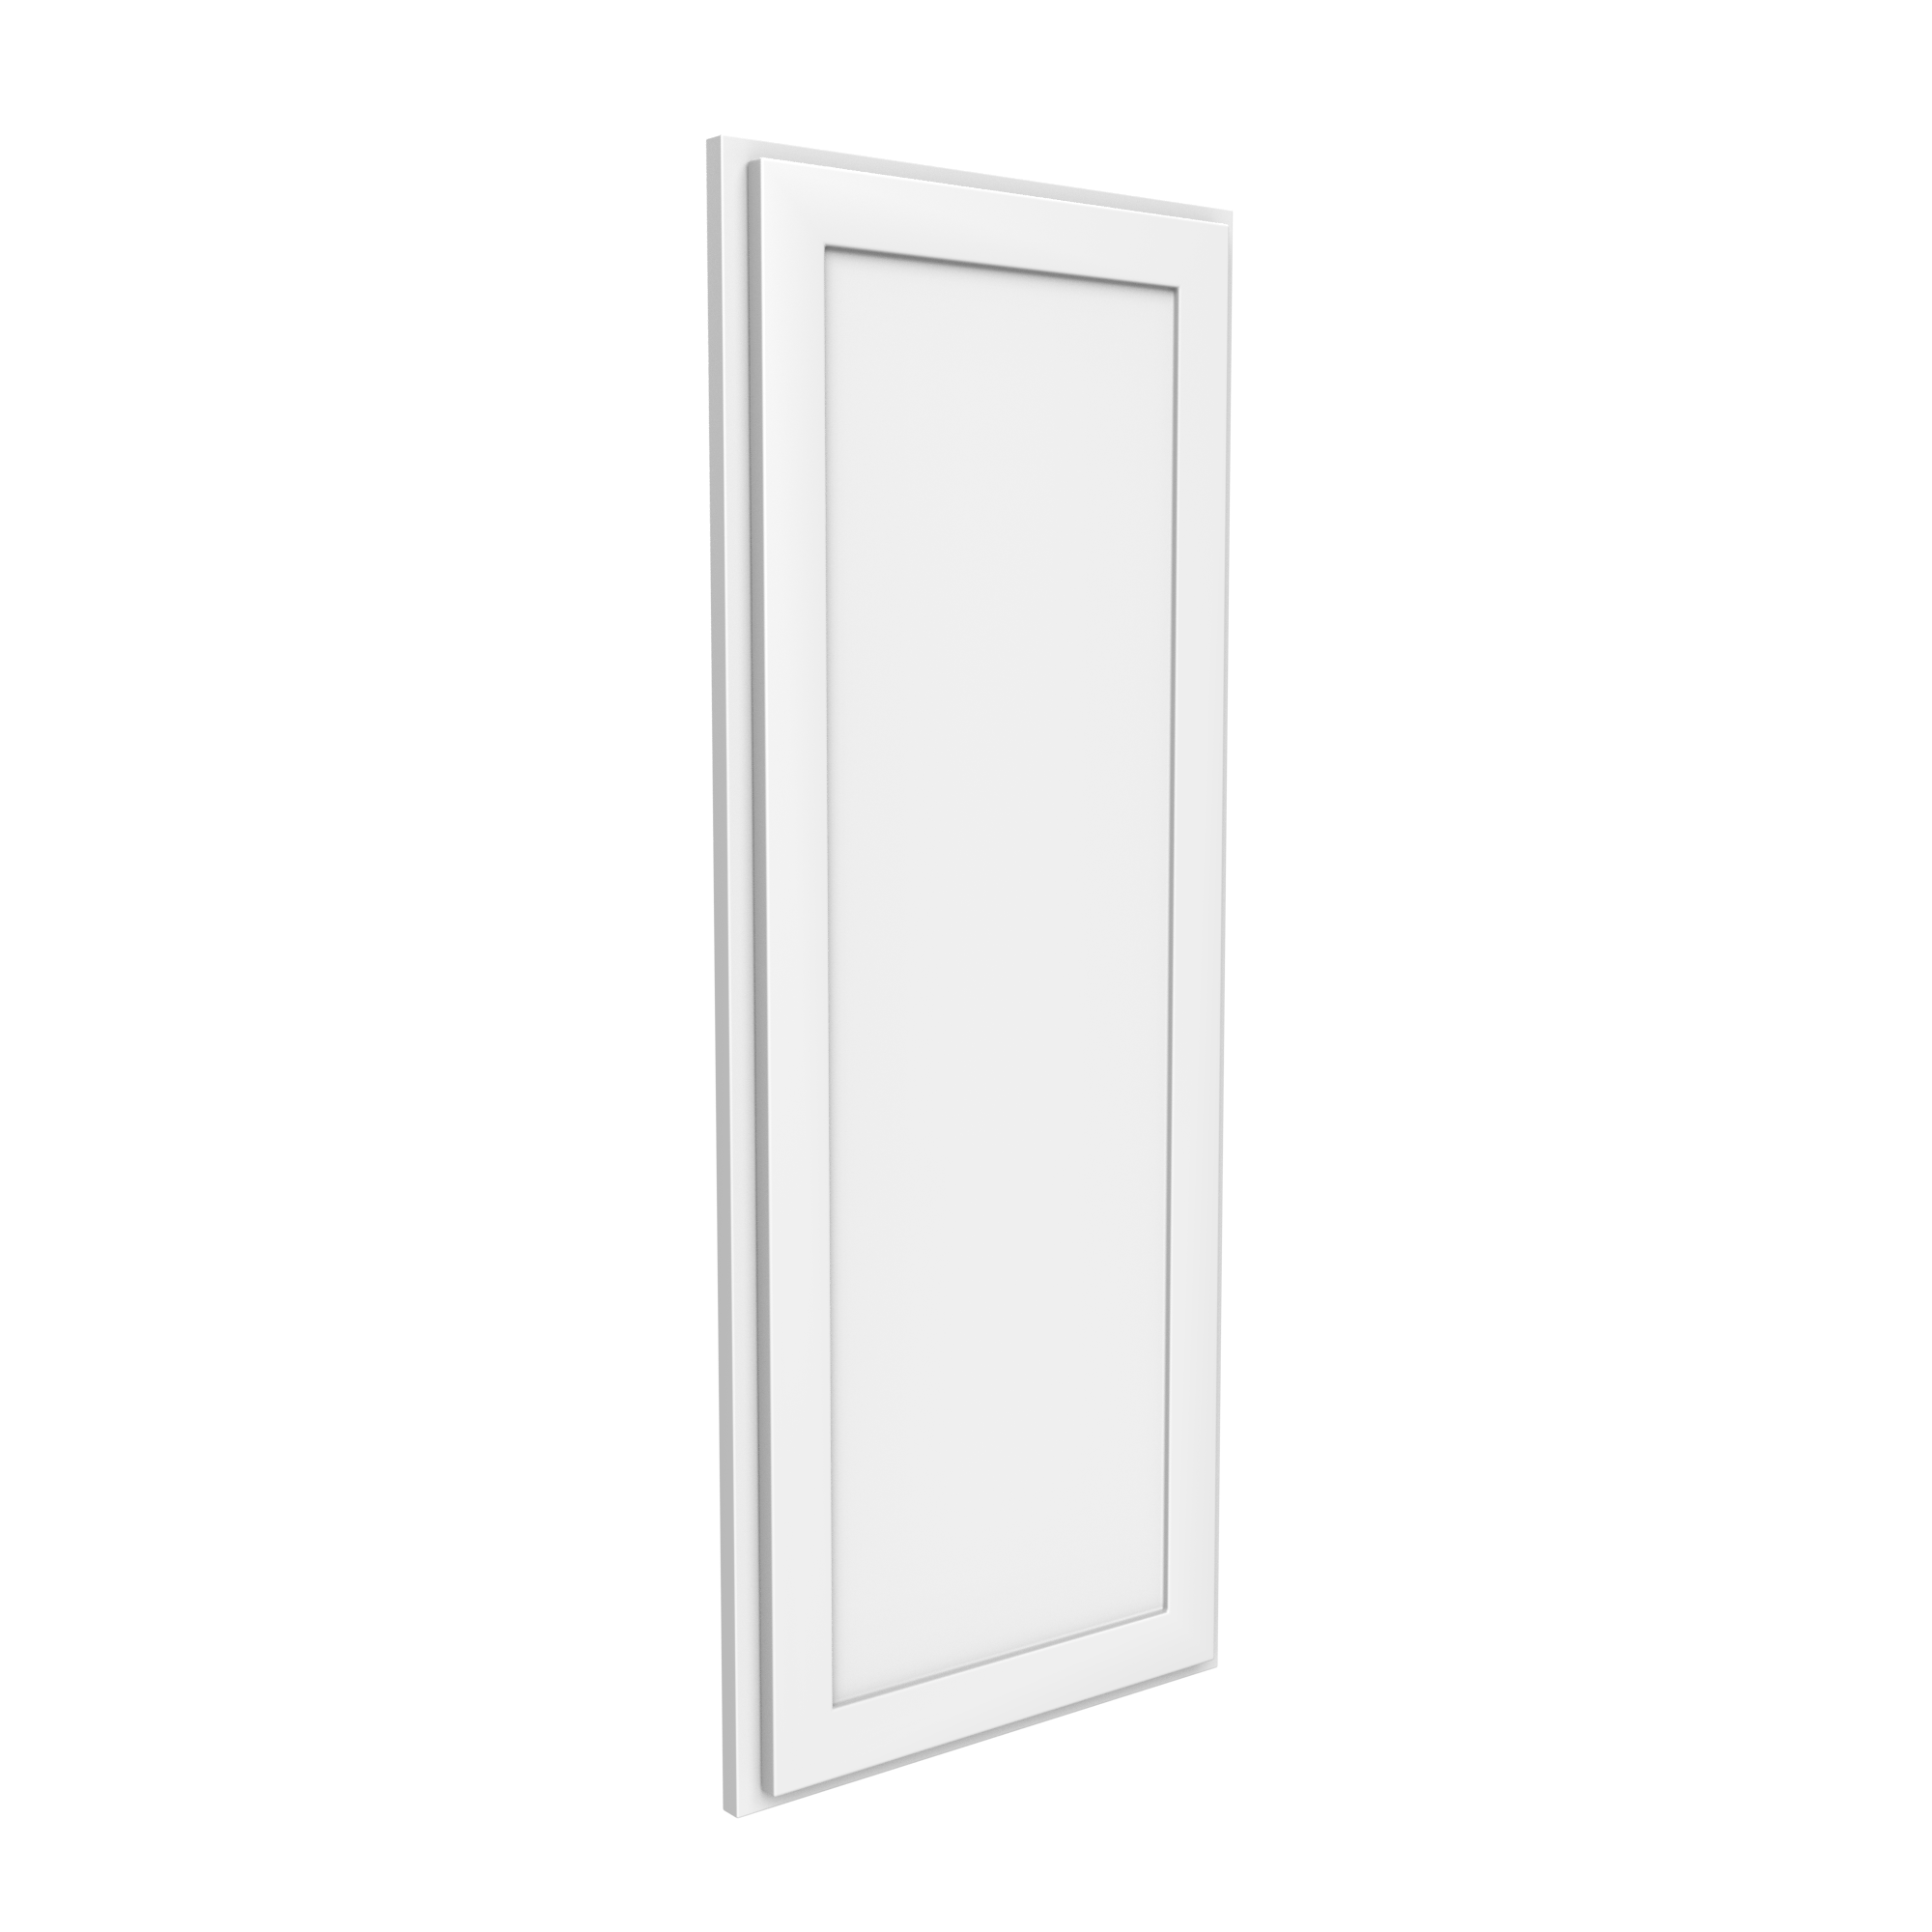 Angle Wall Cabinet - 12W x 42H x 12D - Aria White Shaker - RTA